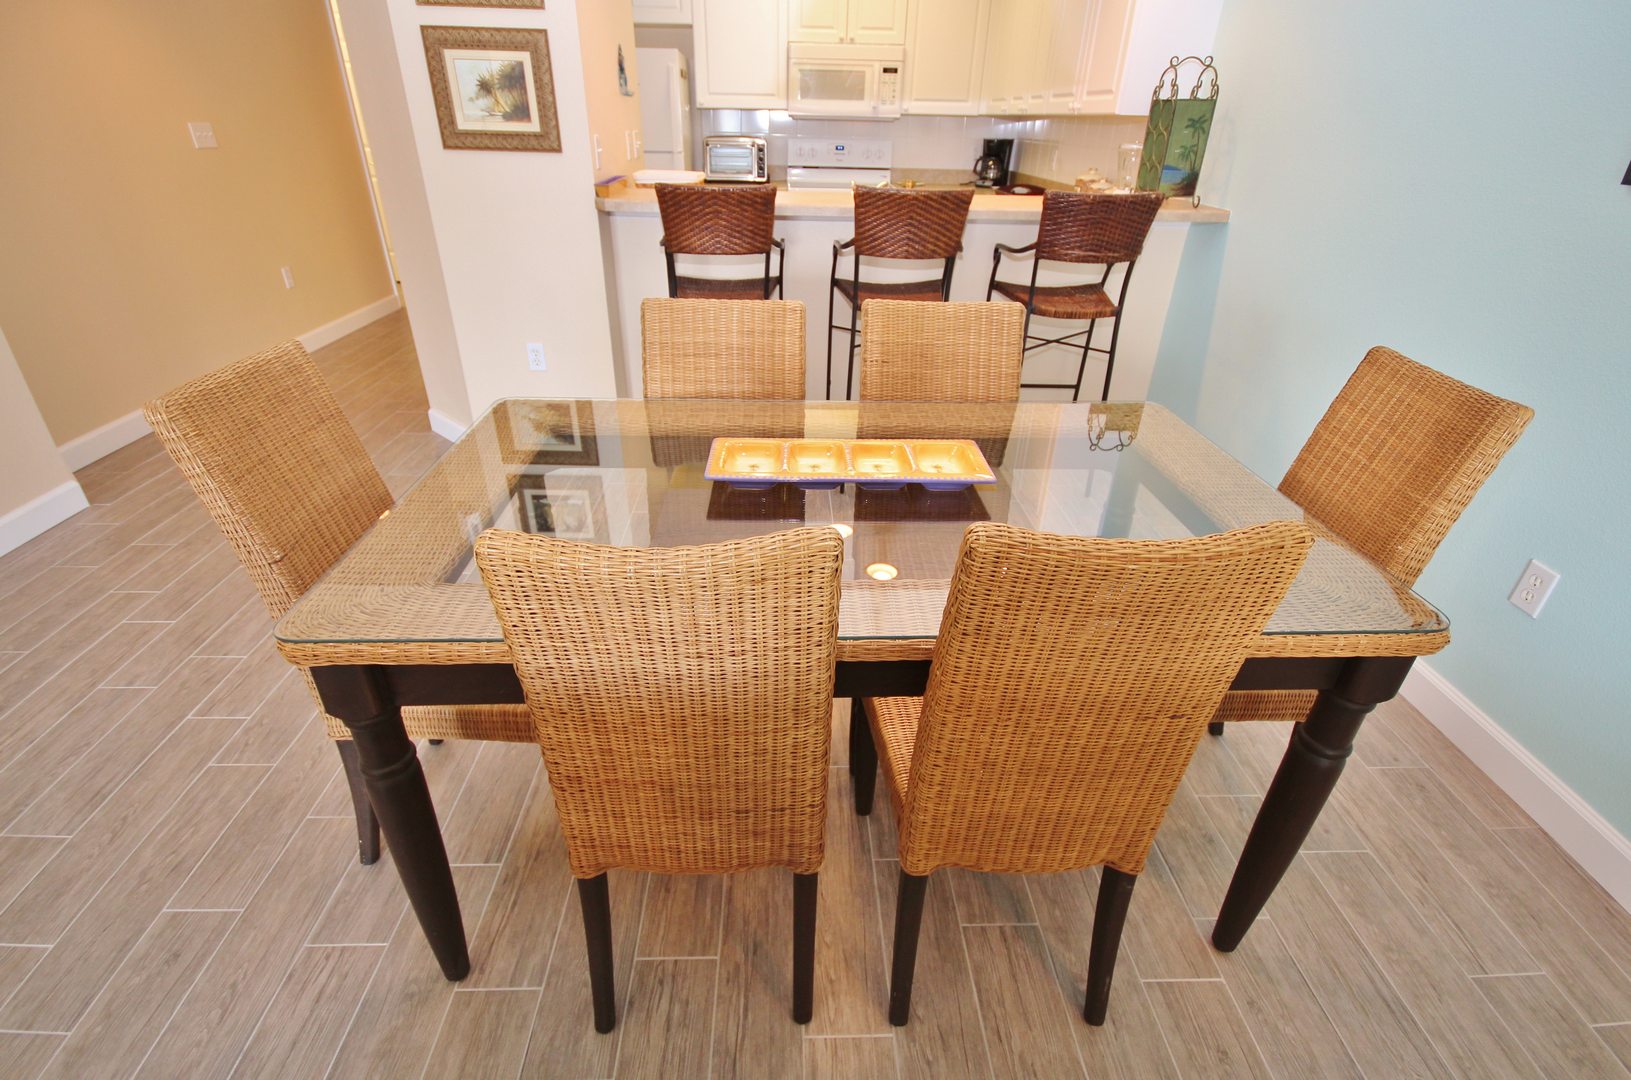 Gather with your group at this dining table